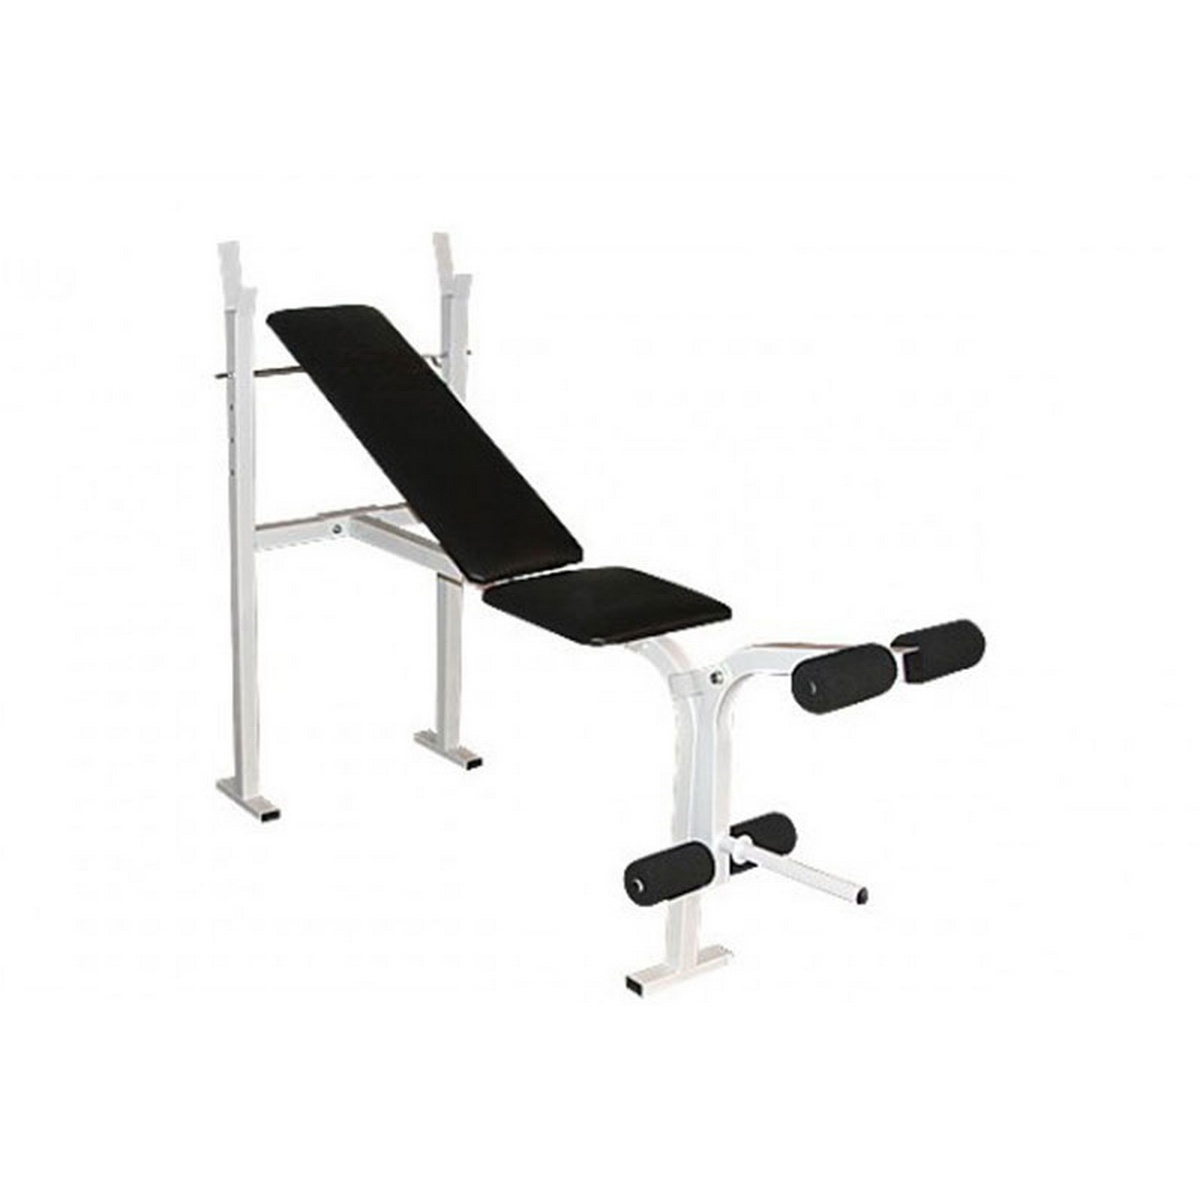 Capriolo Bench Klupa DX-BH115 